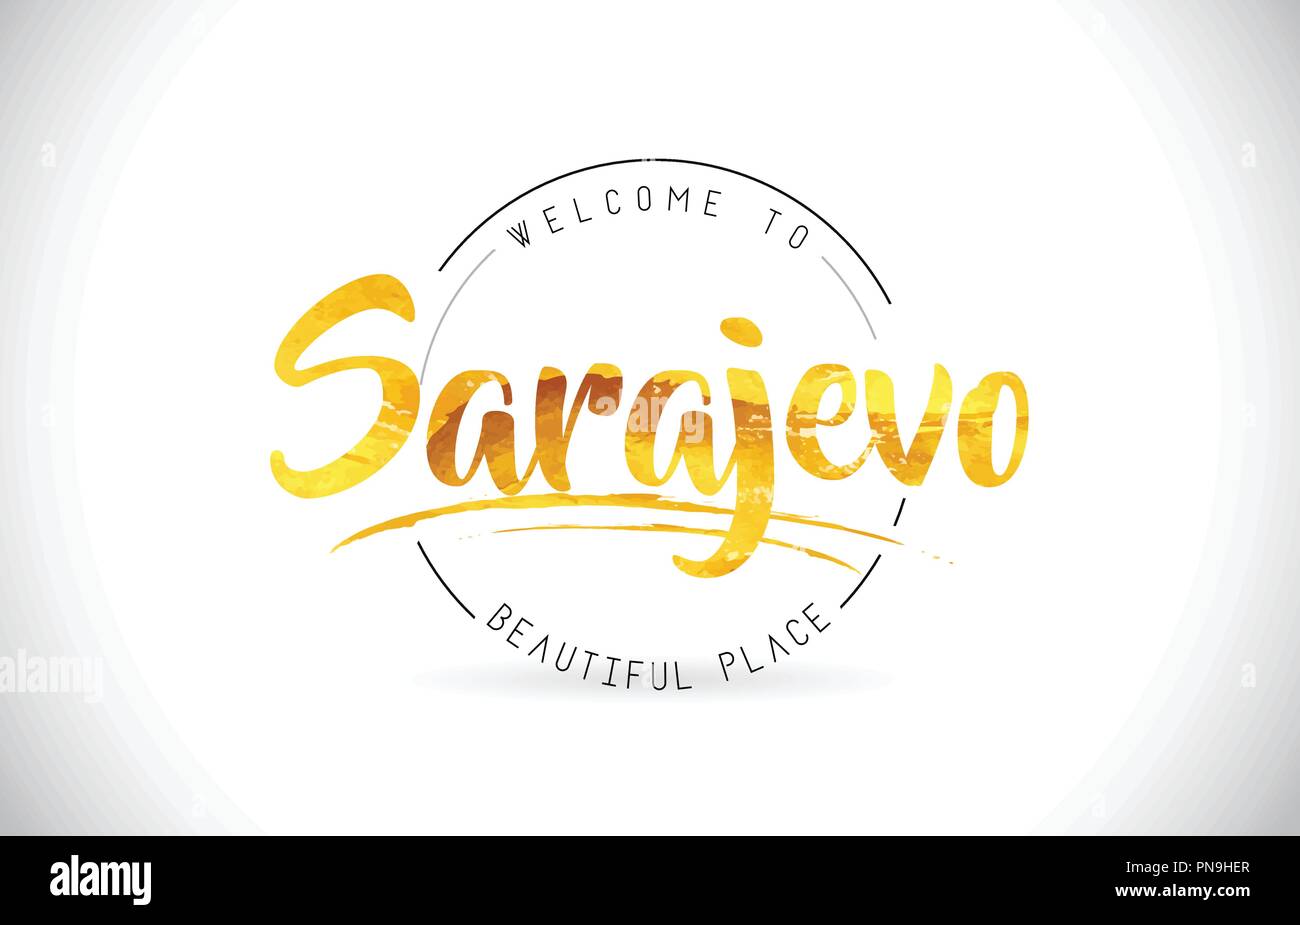 Sarajevo Welcome To Word Text with Handwritten Font and Golden Texture Design Illustration Vector. Stock Vector